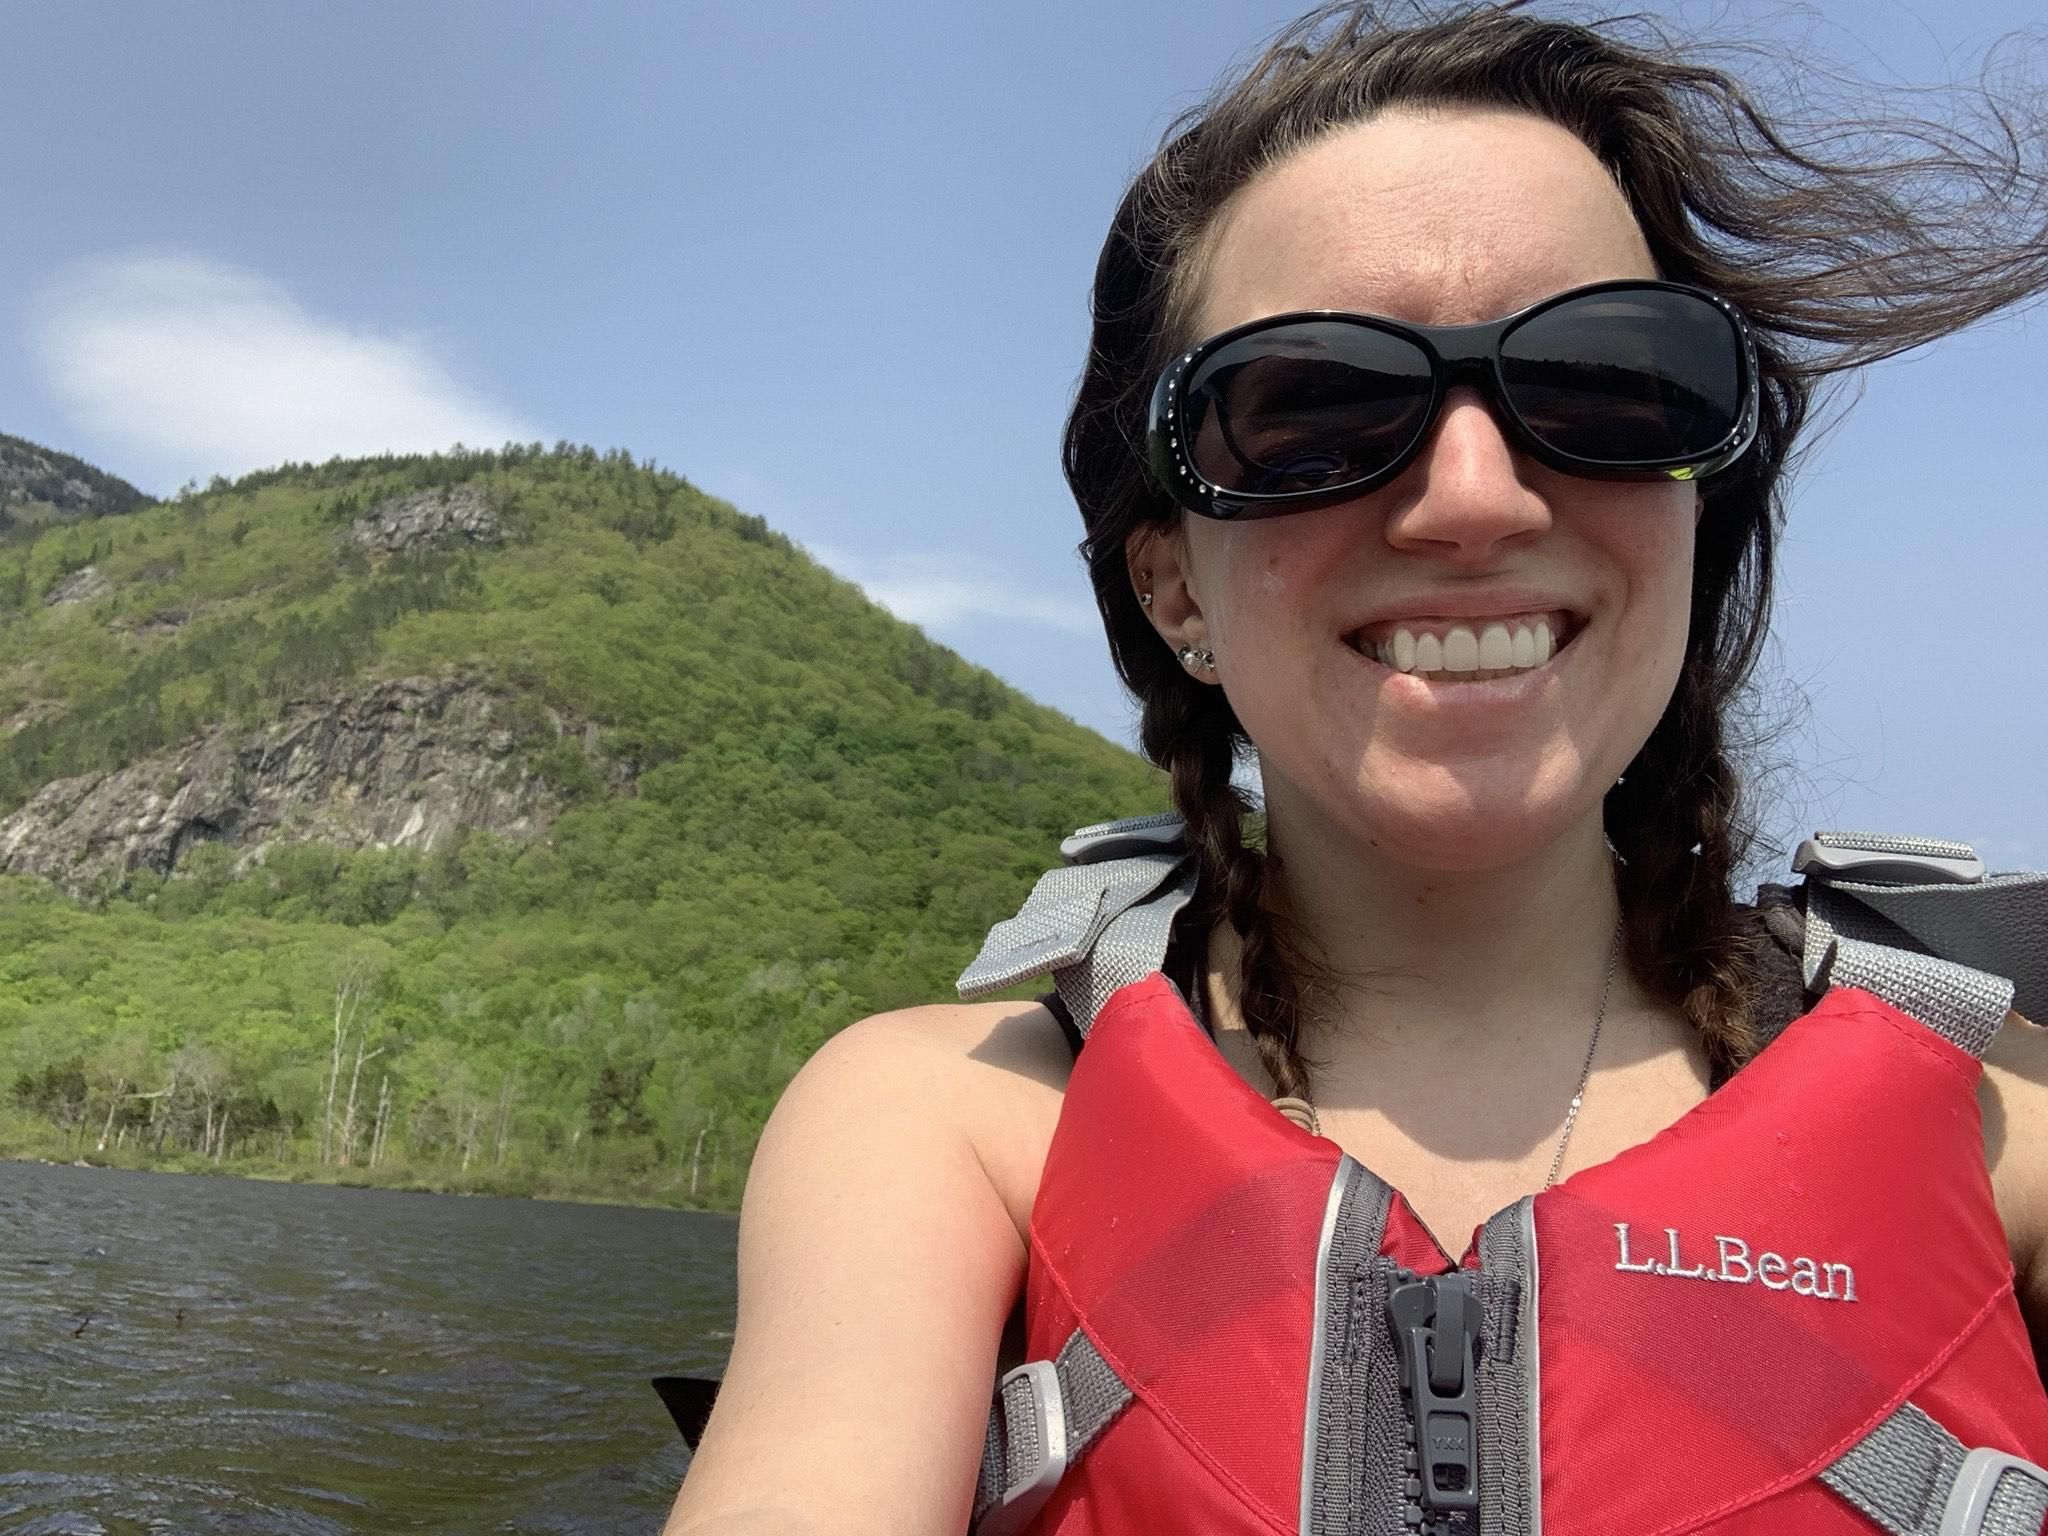 LIz kayaking in front of a mountain wearing a red life vest